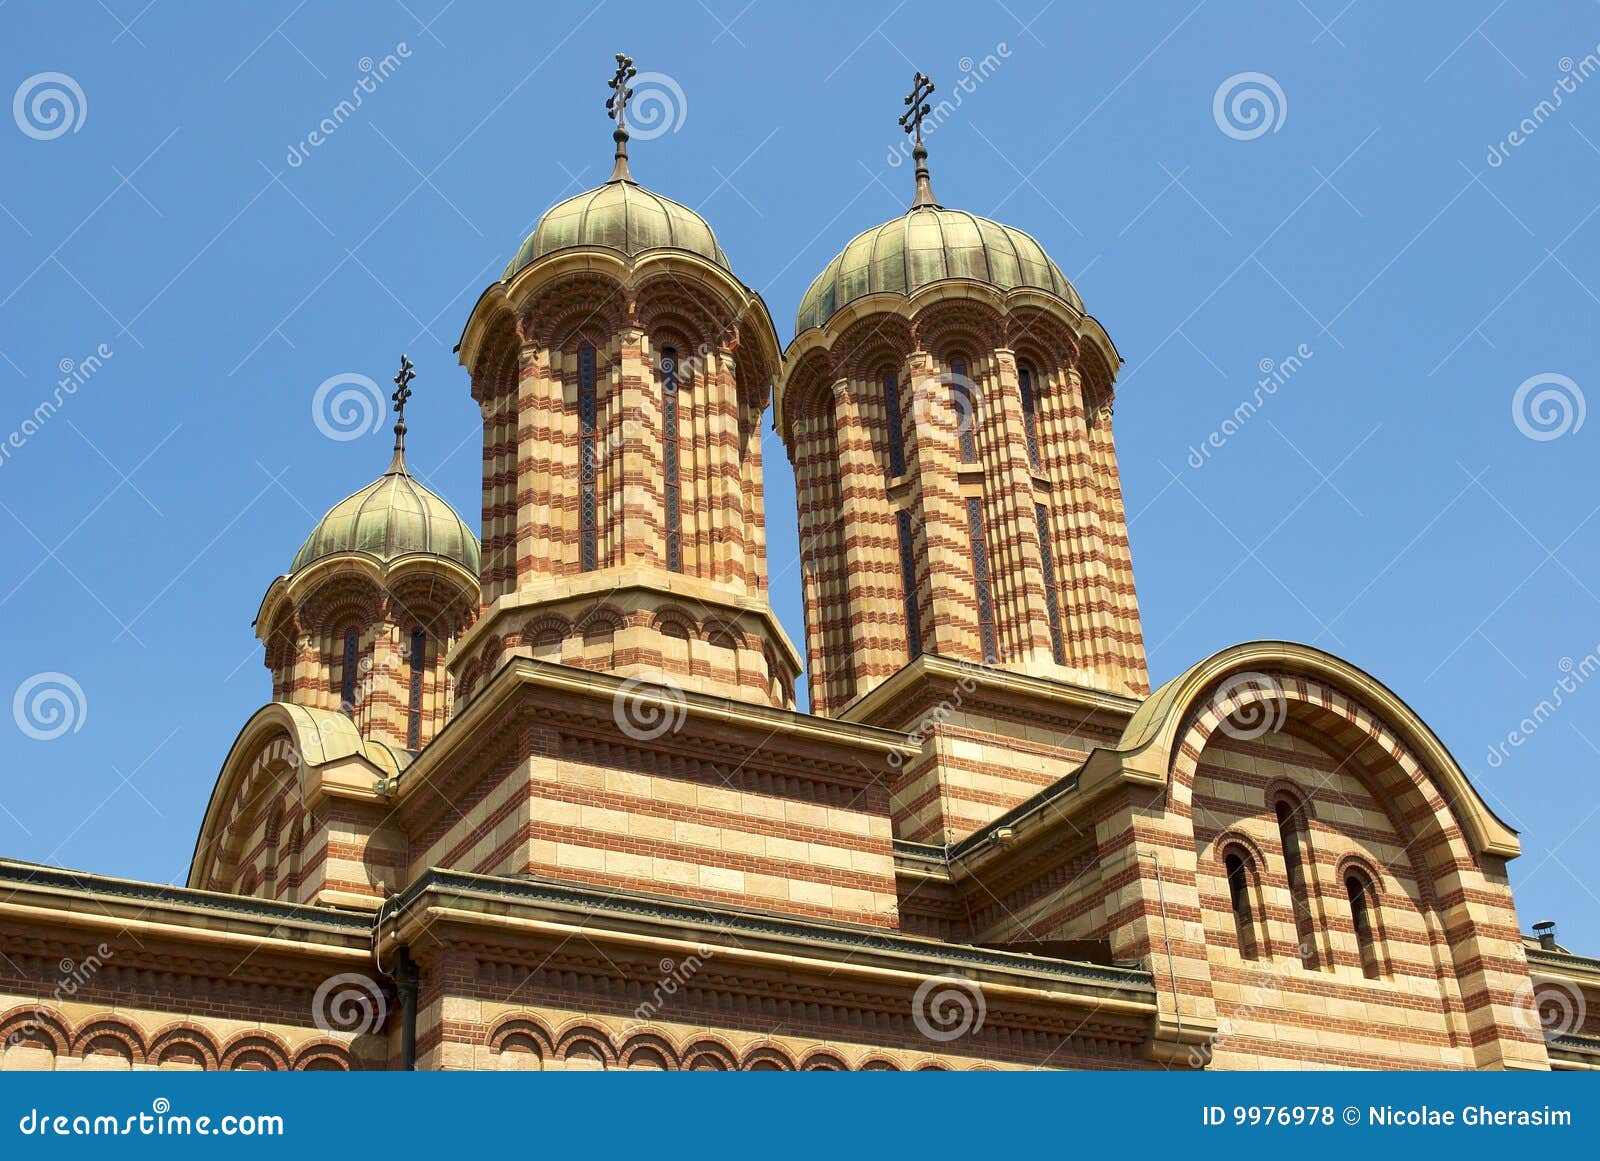 domed cathedral detail